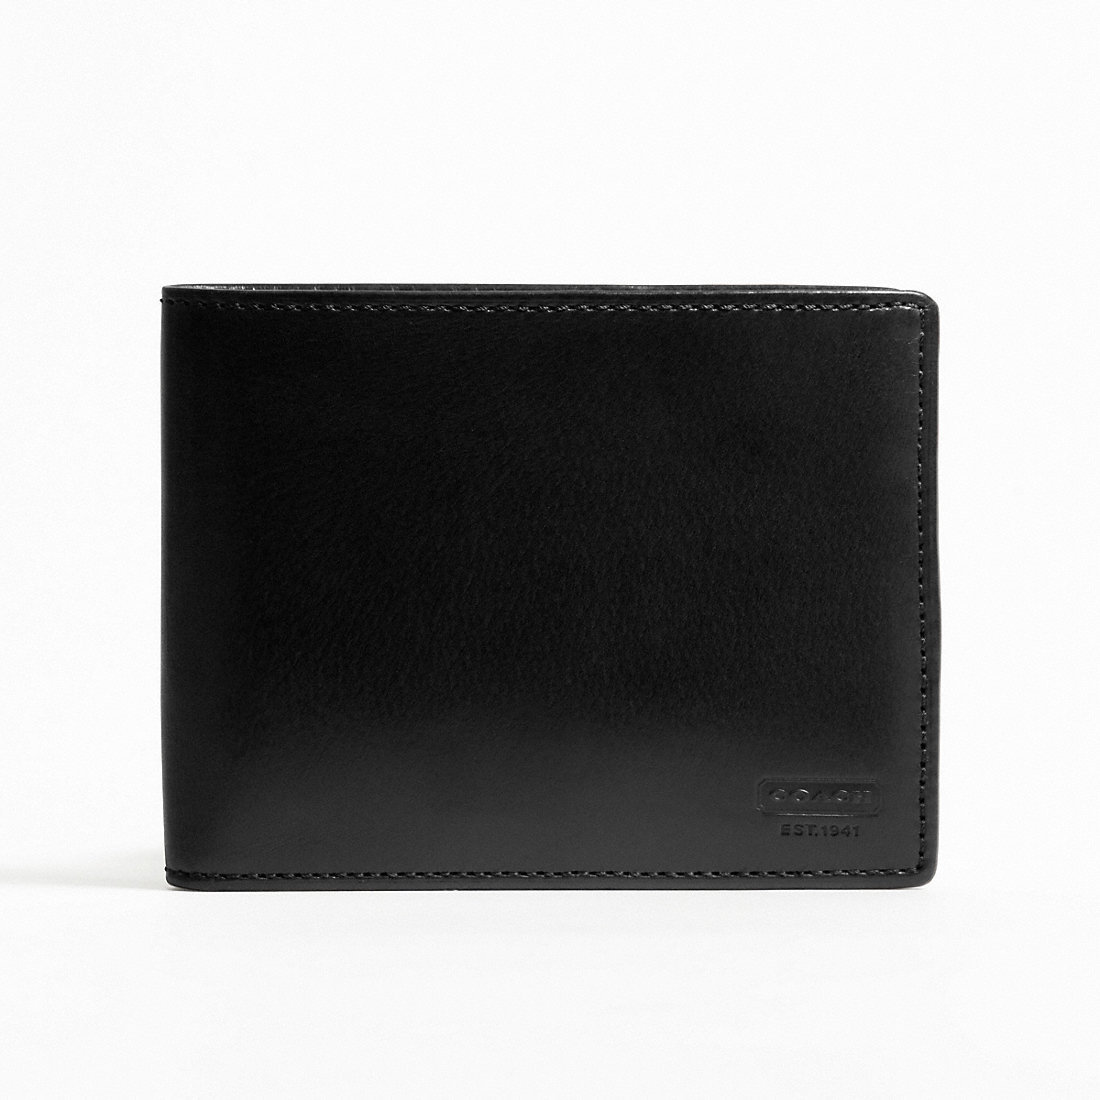 The Chic Sac: Coach Men's Wallet on Sale!